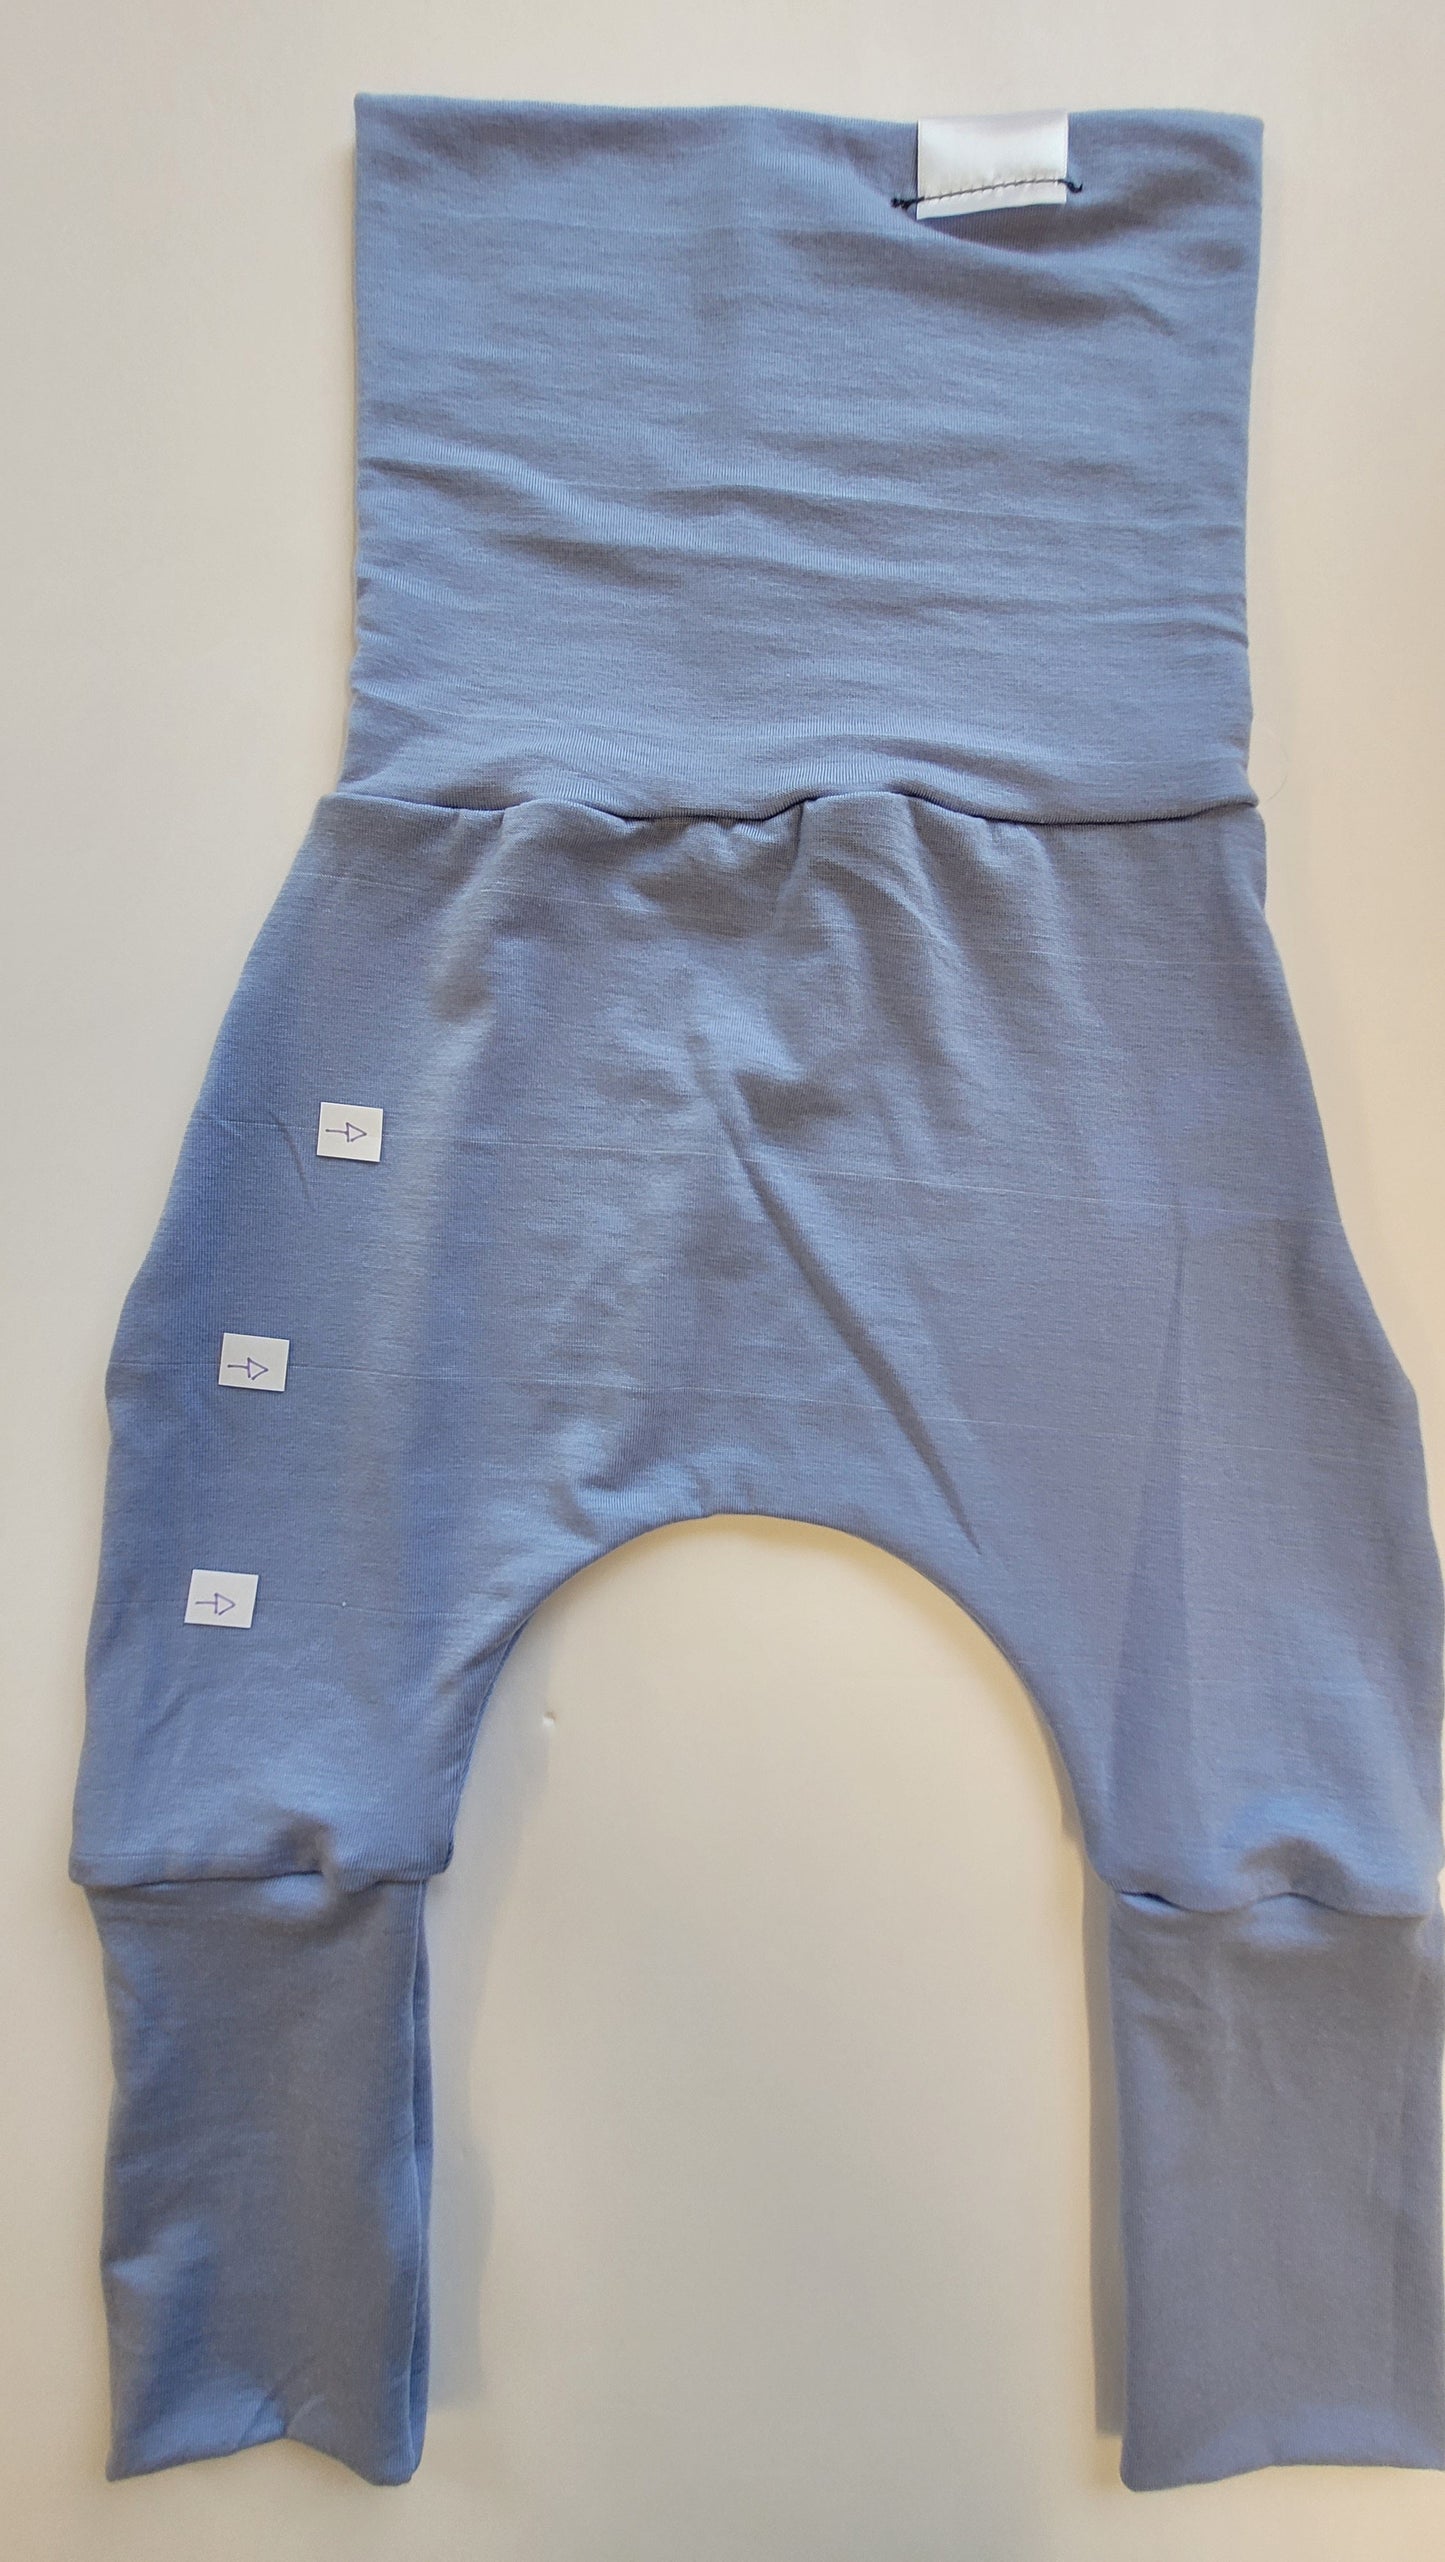 Grow With Me Pants | Periwinkle *6-18 MONTHS